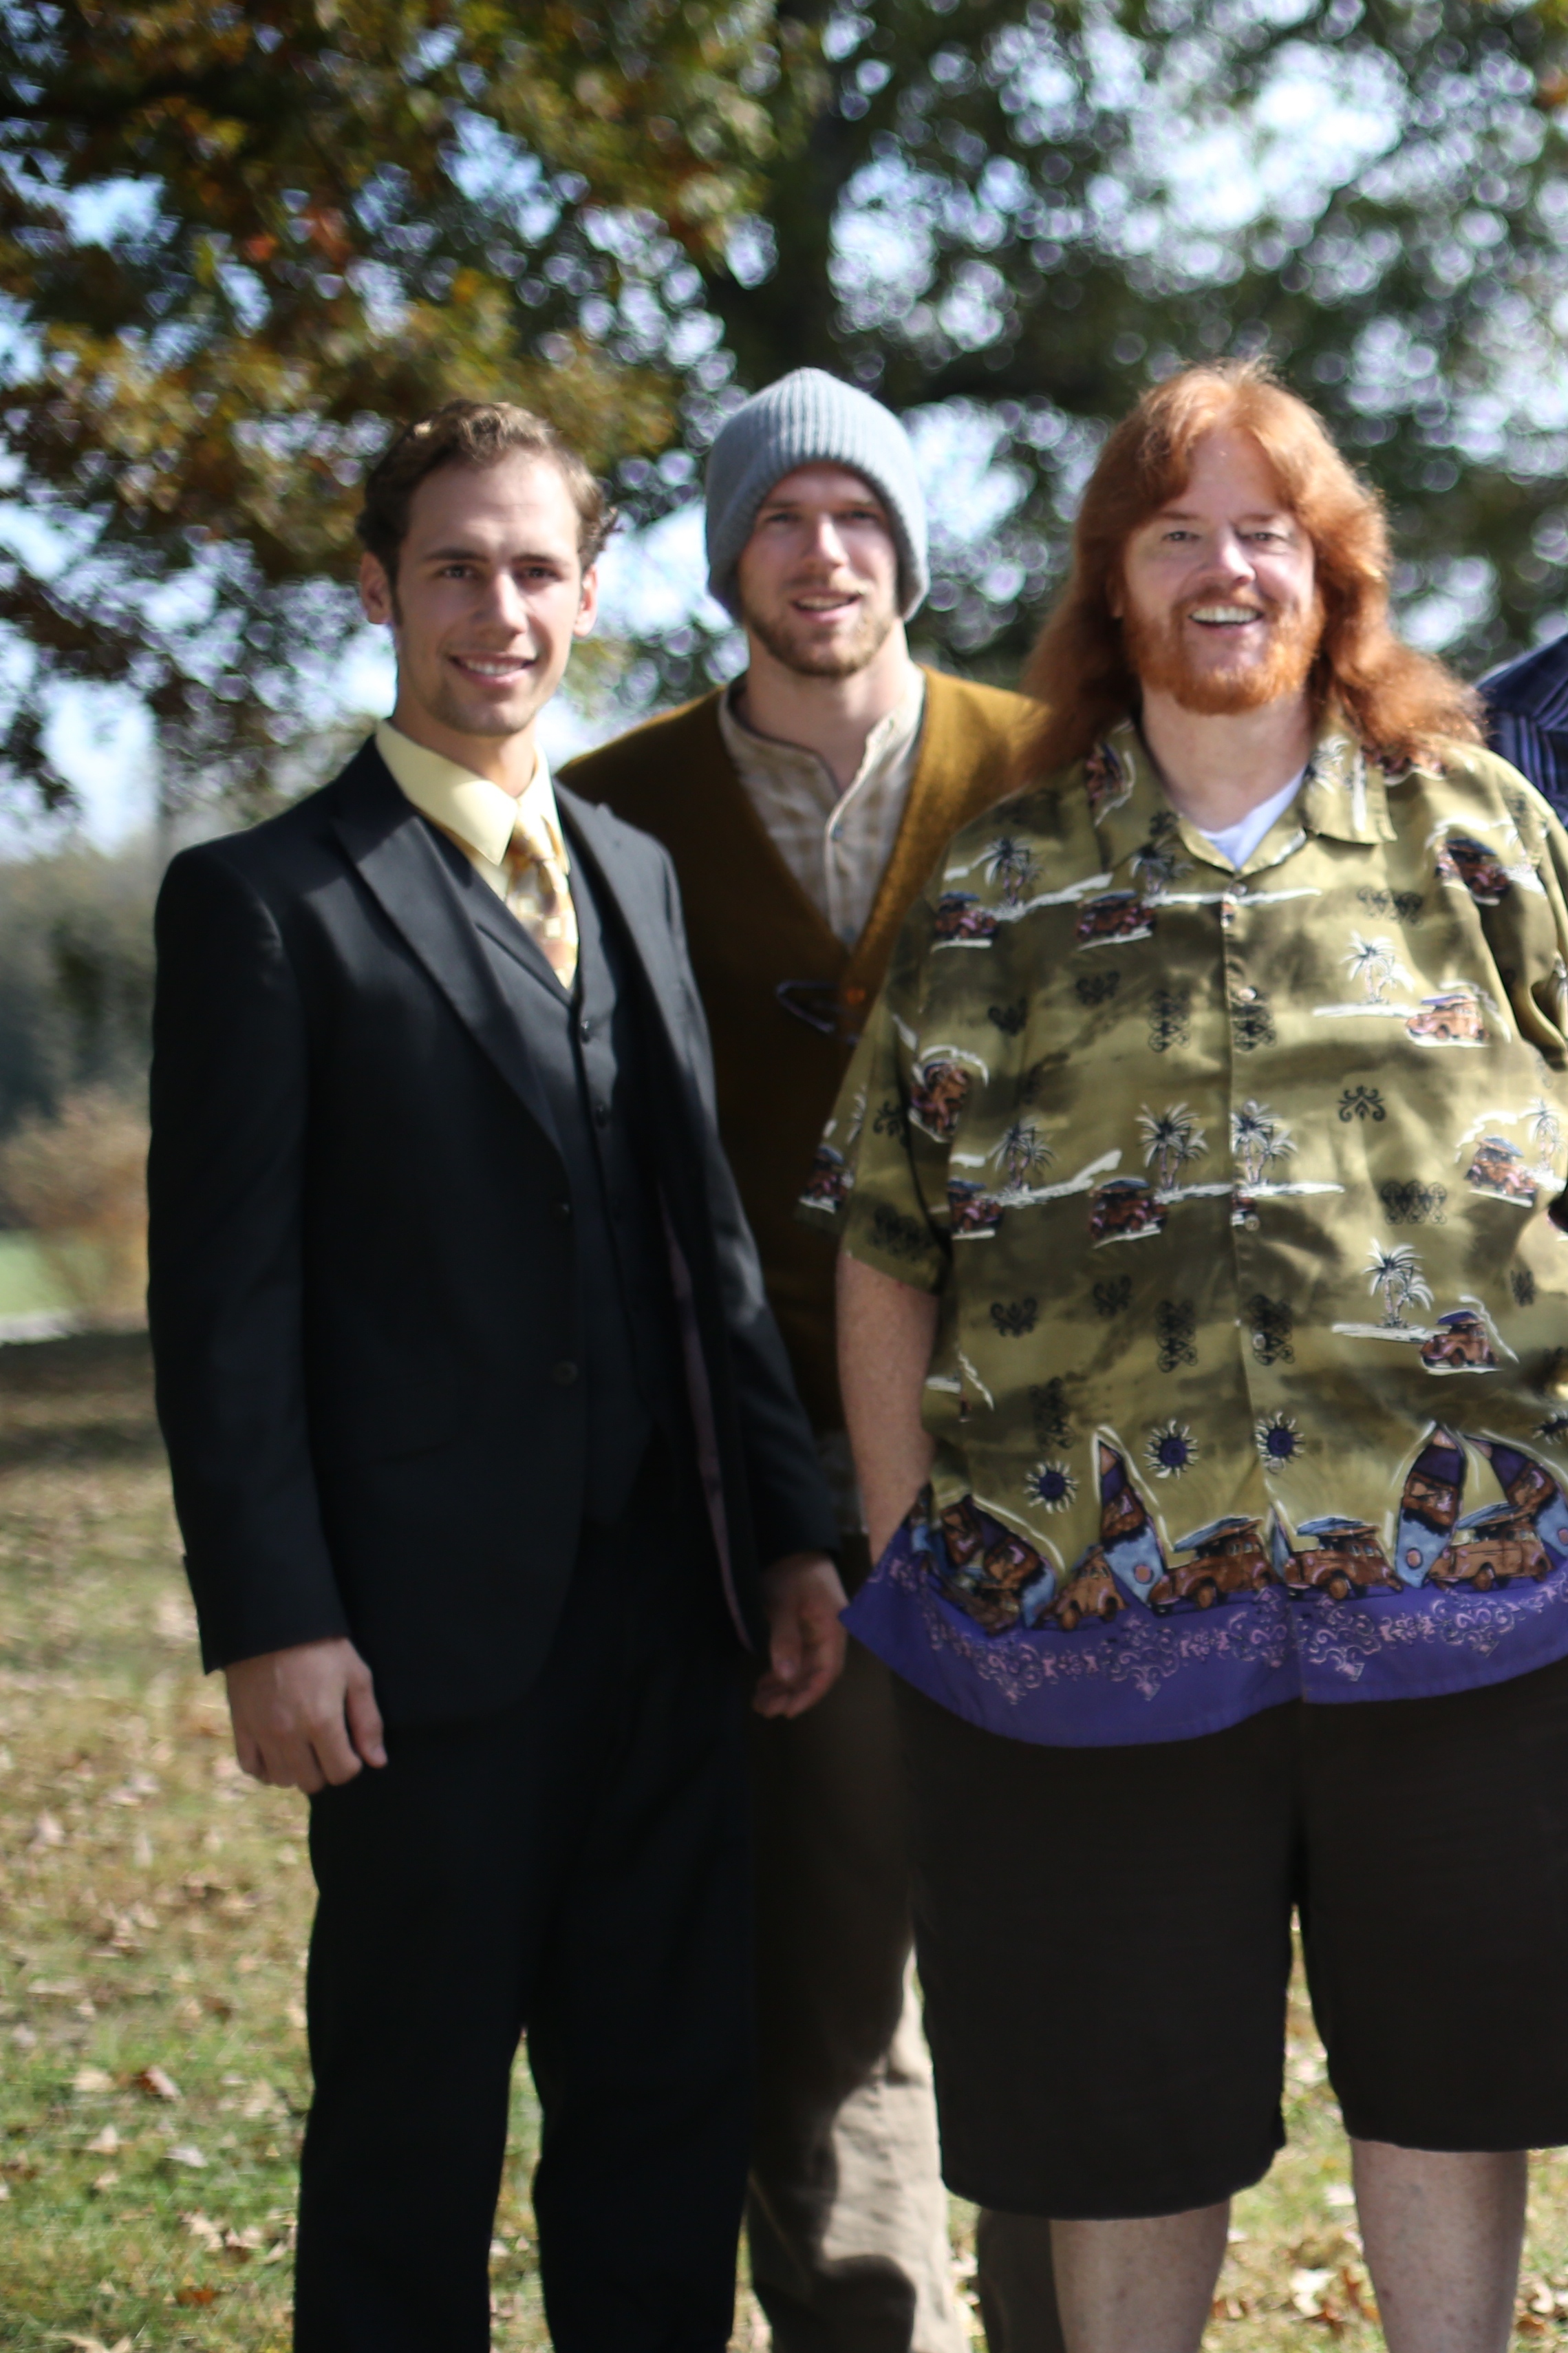 Production still of Nathan Jacobson, Dan Stibral, and Torry Martin on the set of Princess Cut (2015).